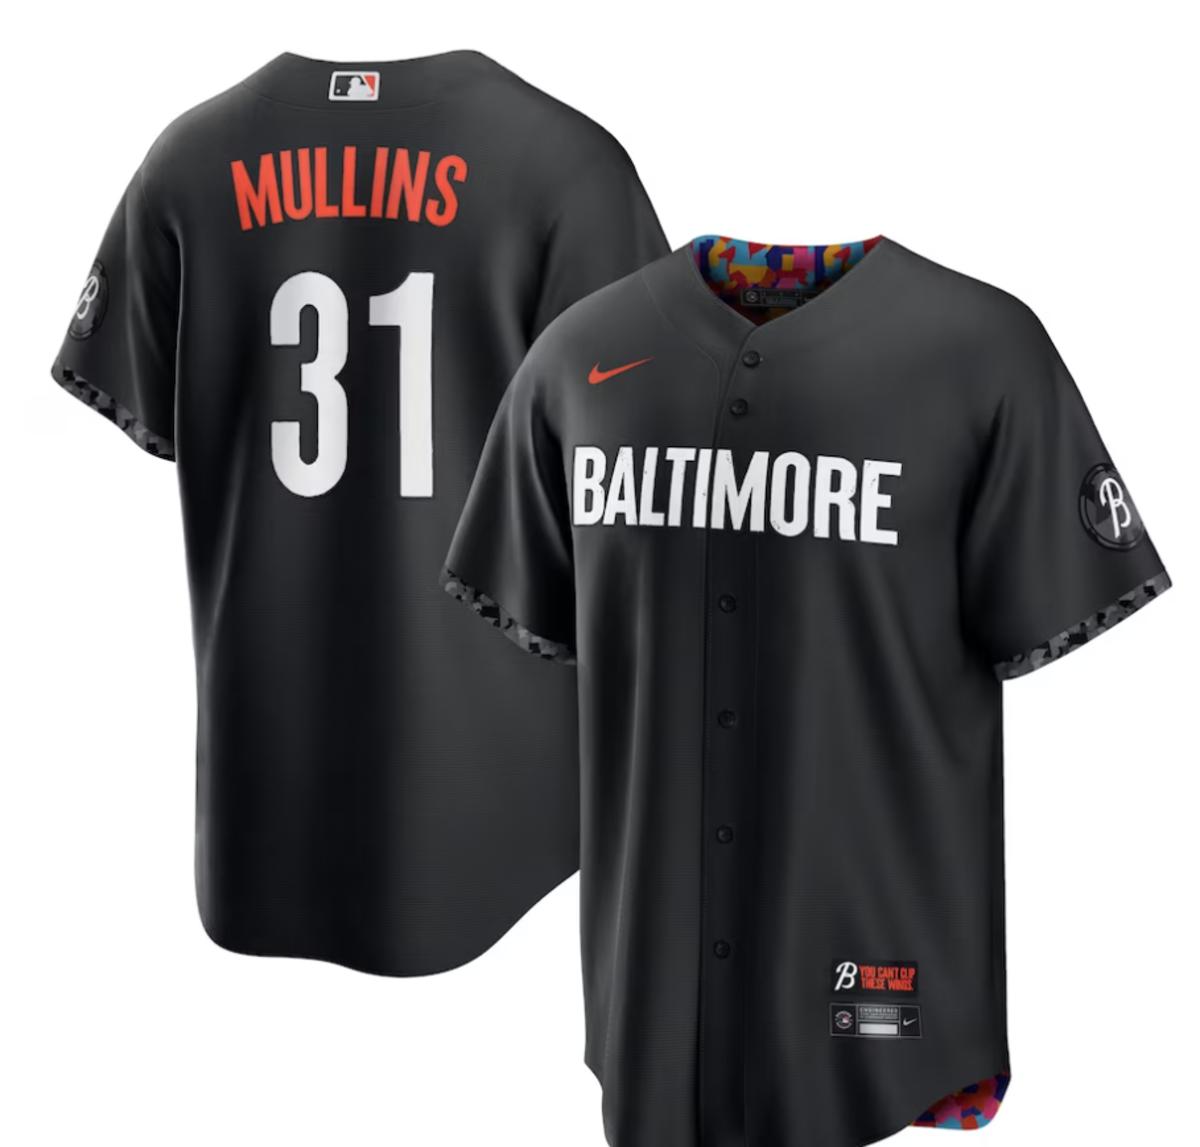 Baltimore Orioles City Connect Collection, how to buy your City